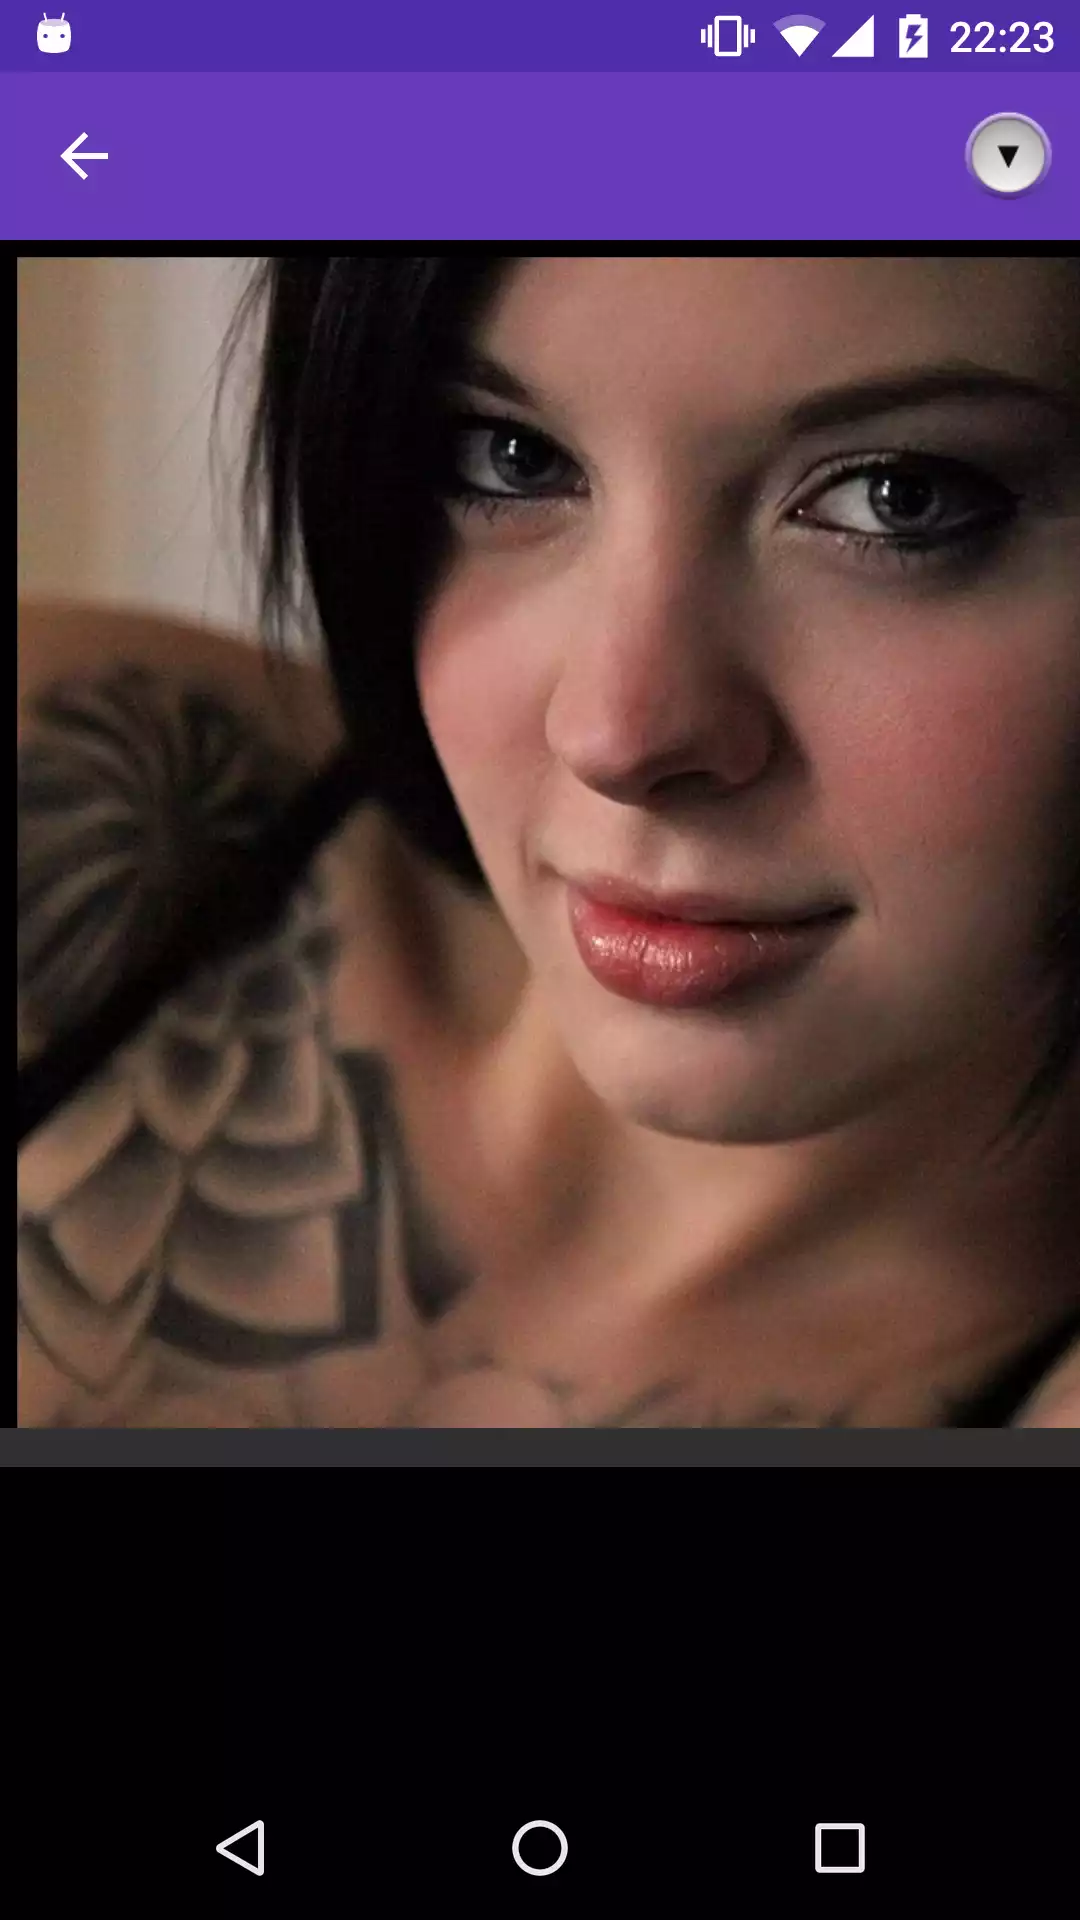 Tattoo Wallpapers erotic,apk,free,porn,photo,tattoo,app,wallpapers,amateur,hentei,pornstars,application,picx,hentai,for,pics,girls,download,android,sex,sexy